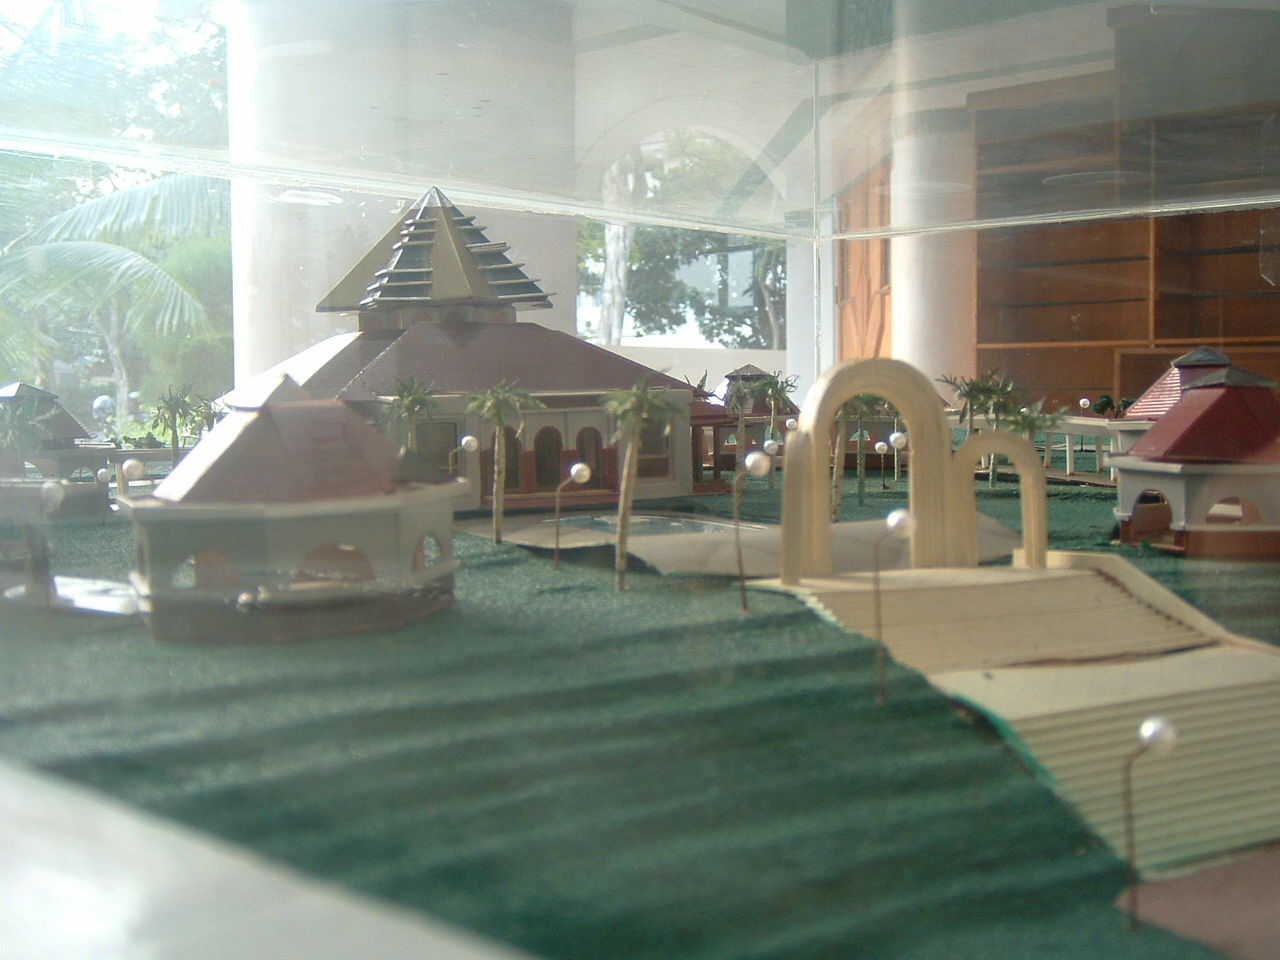 Detail view of northwestern side of mosque model